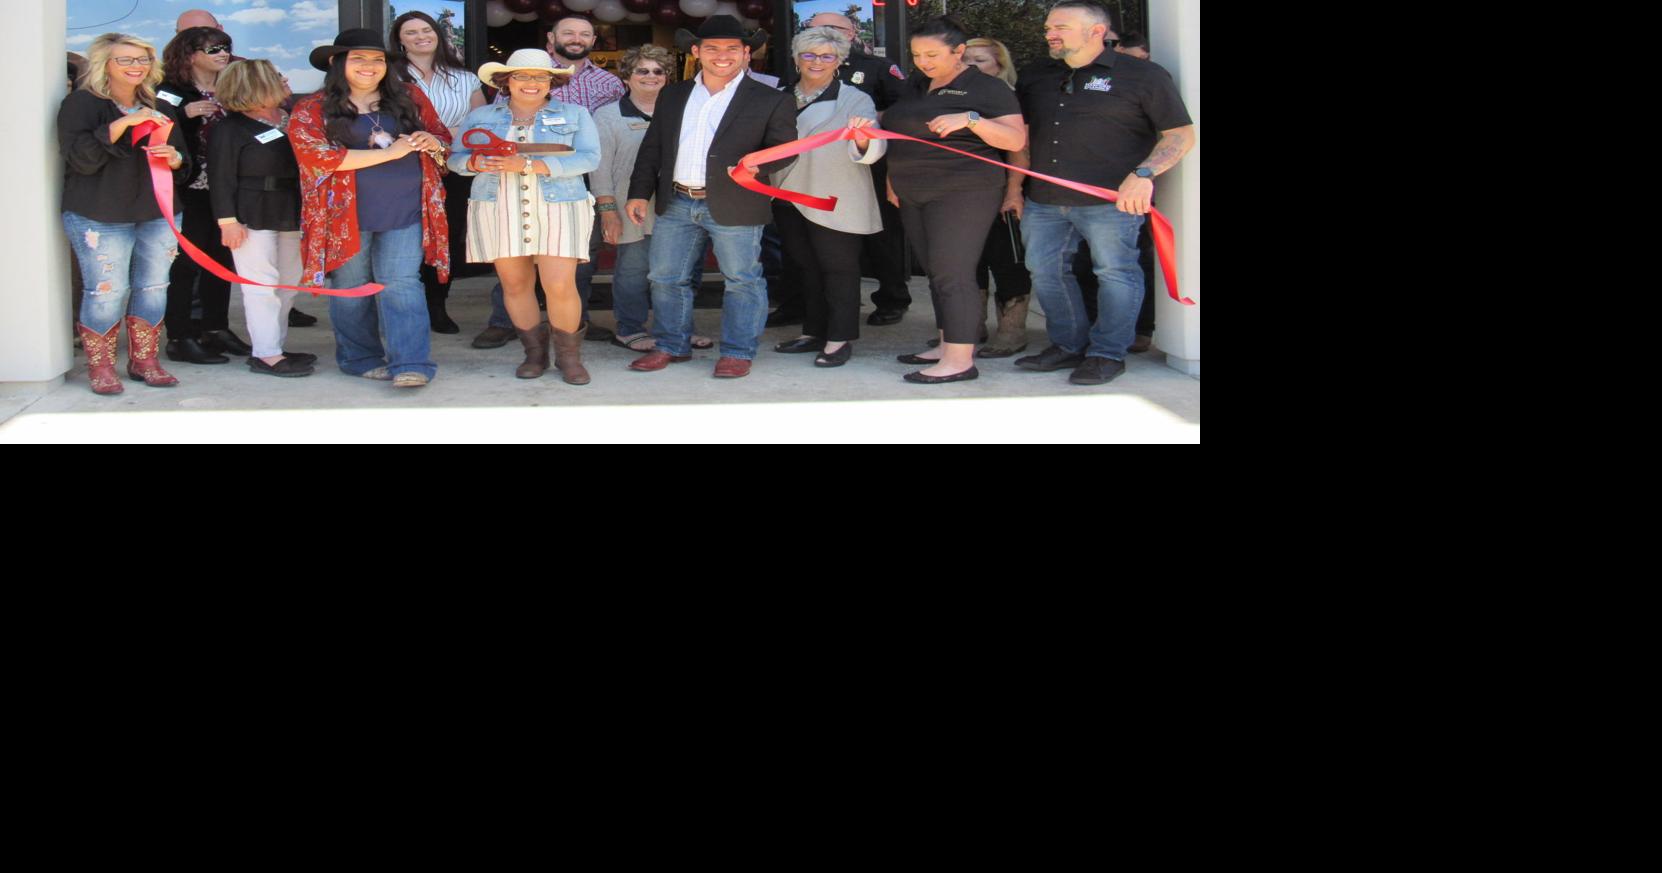 Boot Barn officially opens in Hanford, Local News